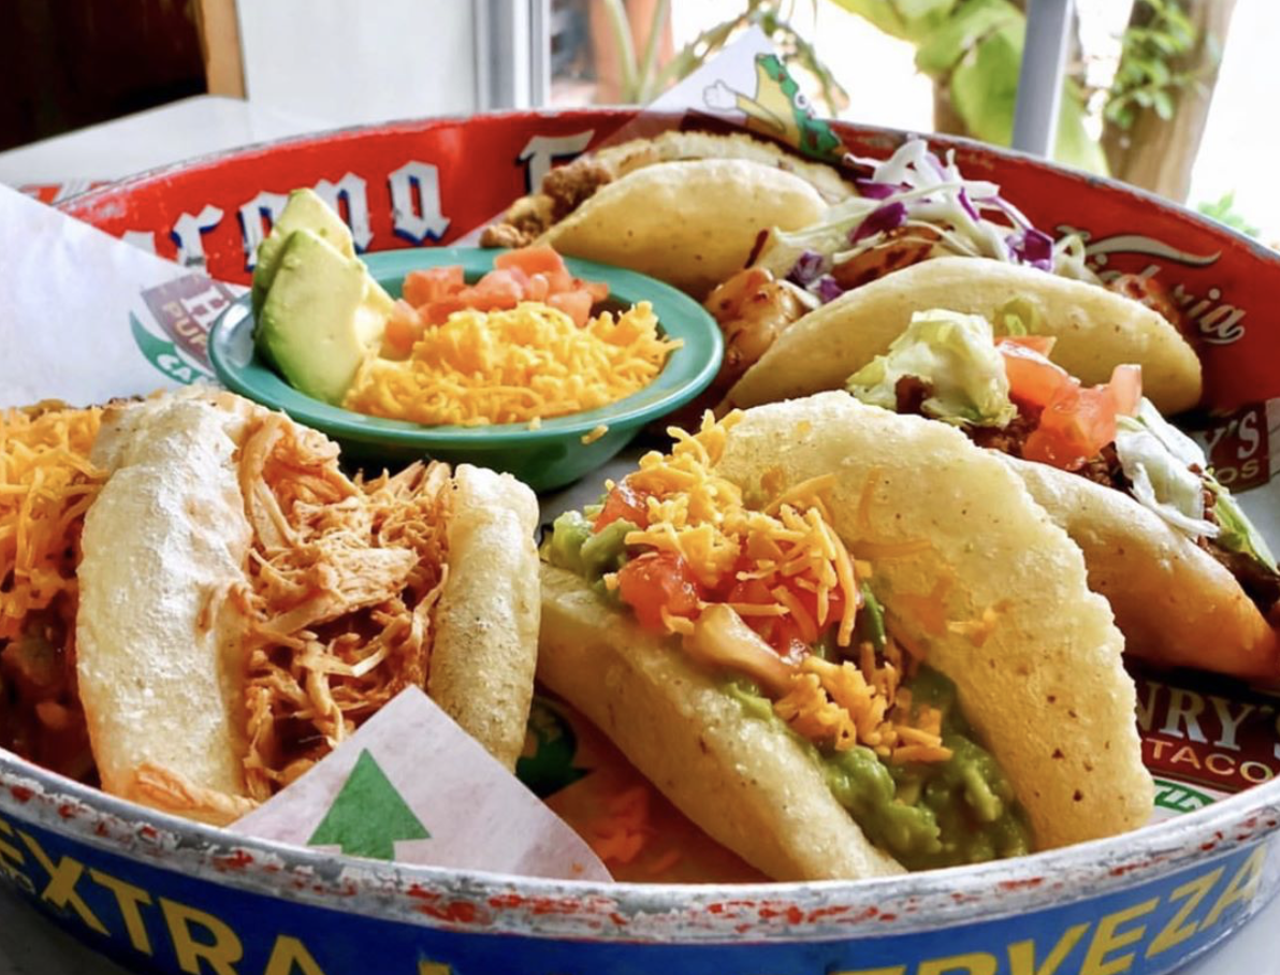 Henry’s Puffy Tacos
Various Locations, henryspuffytacos.com
Every San Antonian has their go-to puffy taco joint, so we’d be remiss not to feature a few. Henry’s Puffy Tacos is offering their full menu, family meals and alcohol to-go with drive-thru service at both locations and delivery via  Postmates and DoorDash. 
Photo via Instagram /  
henryspuffytacos